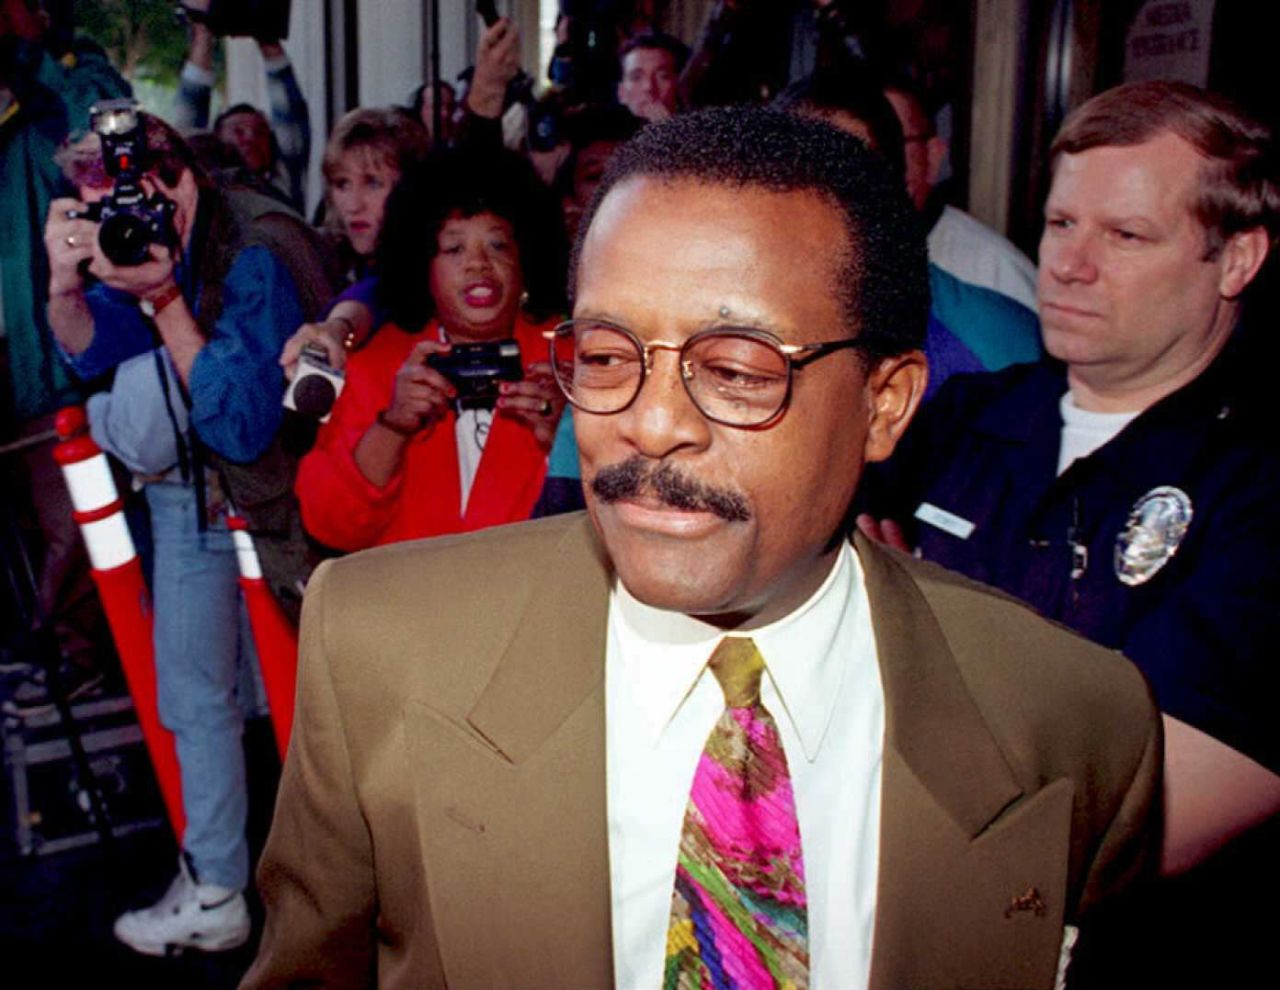 <strong>Johnnie Cochran: </strong>During Simpson's 1995 trial, Cochran famously quipped, "If it doesn't fit, you must acquit," in reminding jurors during his summation that the former star football running back couldn't fit his hand inside a bloody glove found at the scene of the killings. Cochran died on March 29, 2005, at age 67, in his home in Los Angeles from an inoperable brain tumor.